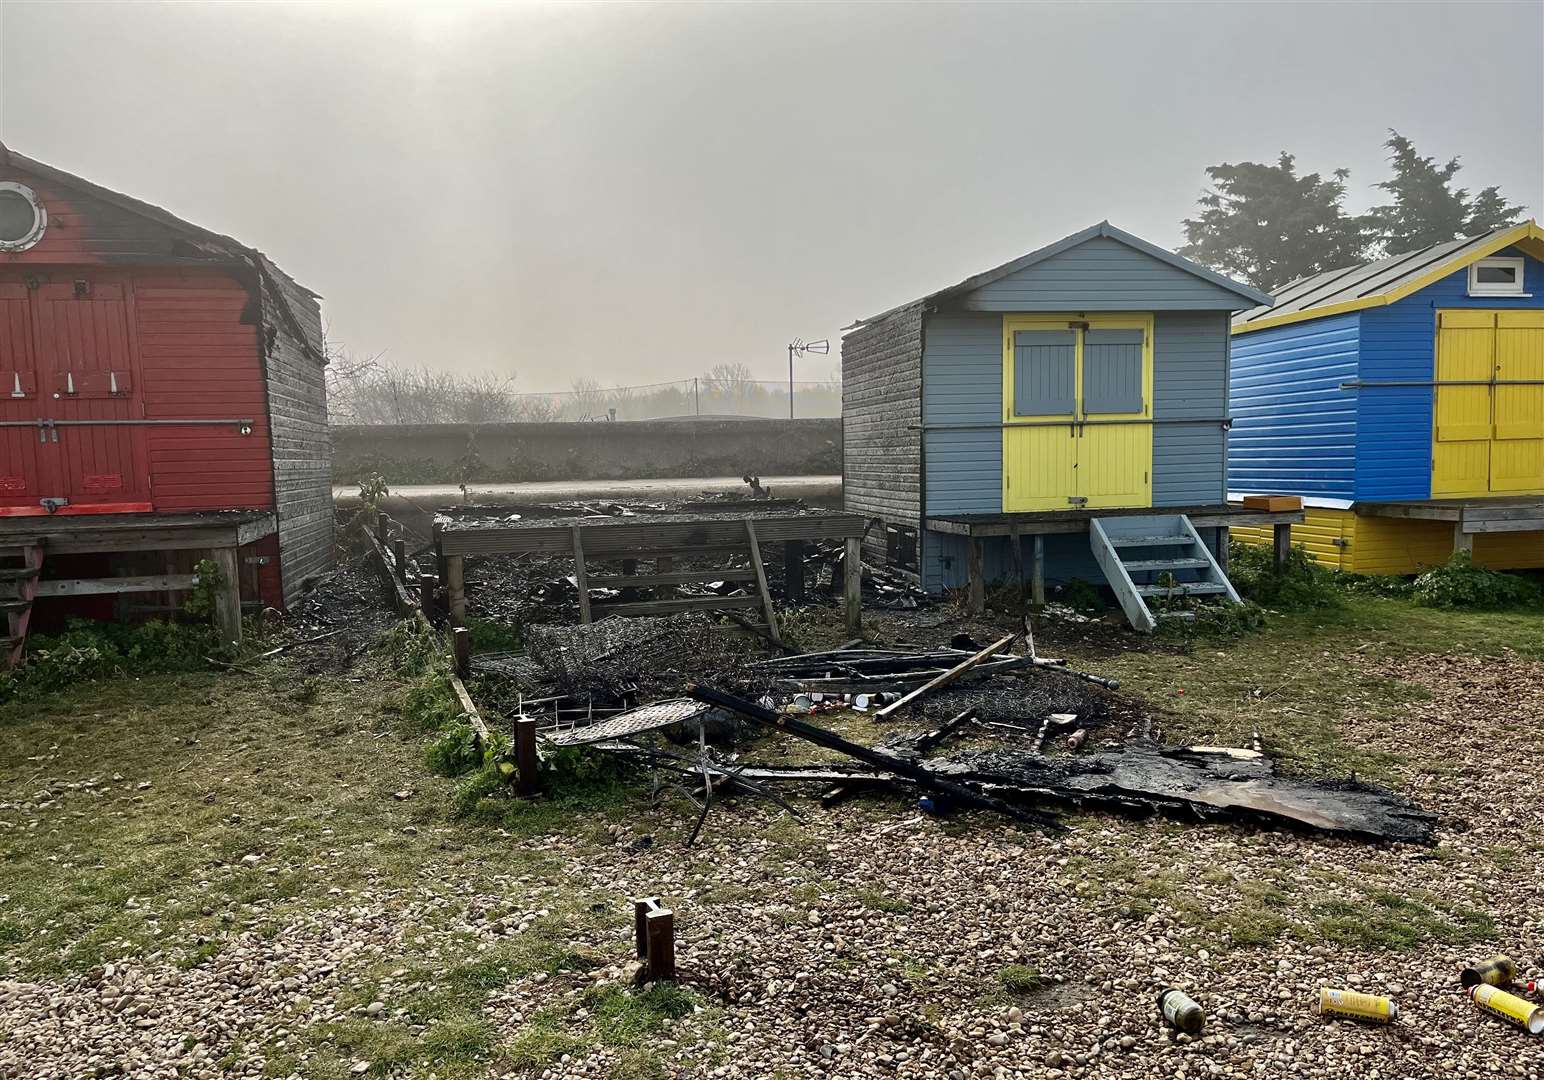 Three beach huts were damaged, with one completely razed to the ground